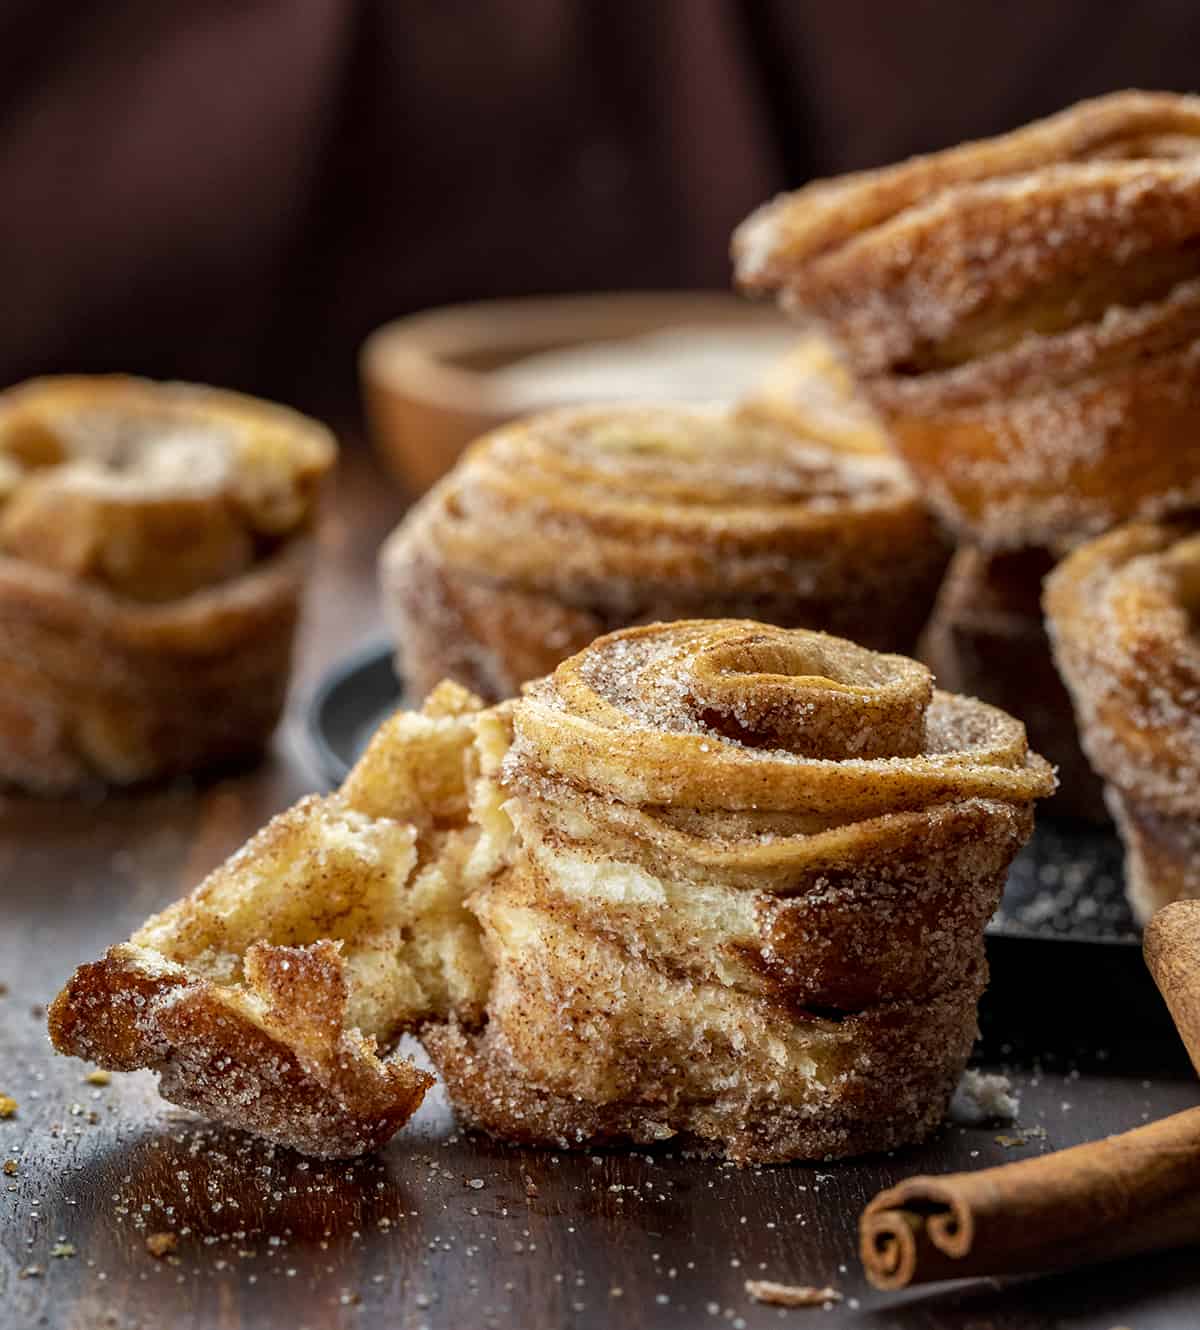 Cruffin Being Pulled Apart to Show Layers. Baking, Breakfast, Cruffins, Croissant Muffins, Easy Cruffins, Easy Cruffin Recipe, Fall Baking, Cinnamon Cruffins, Cinnamon Sugar Cruffins, Dessert, Breakfast Ideas, Brunch Recipes, i am baker, iambaker